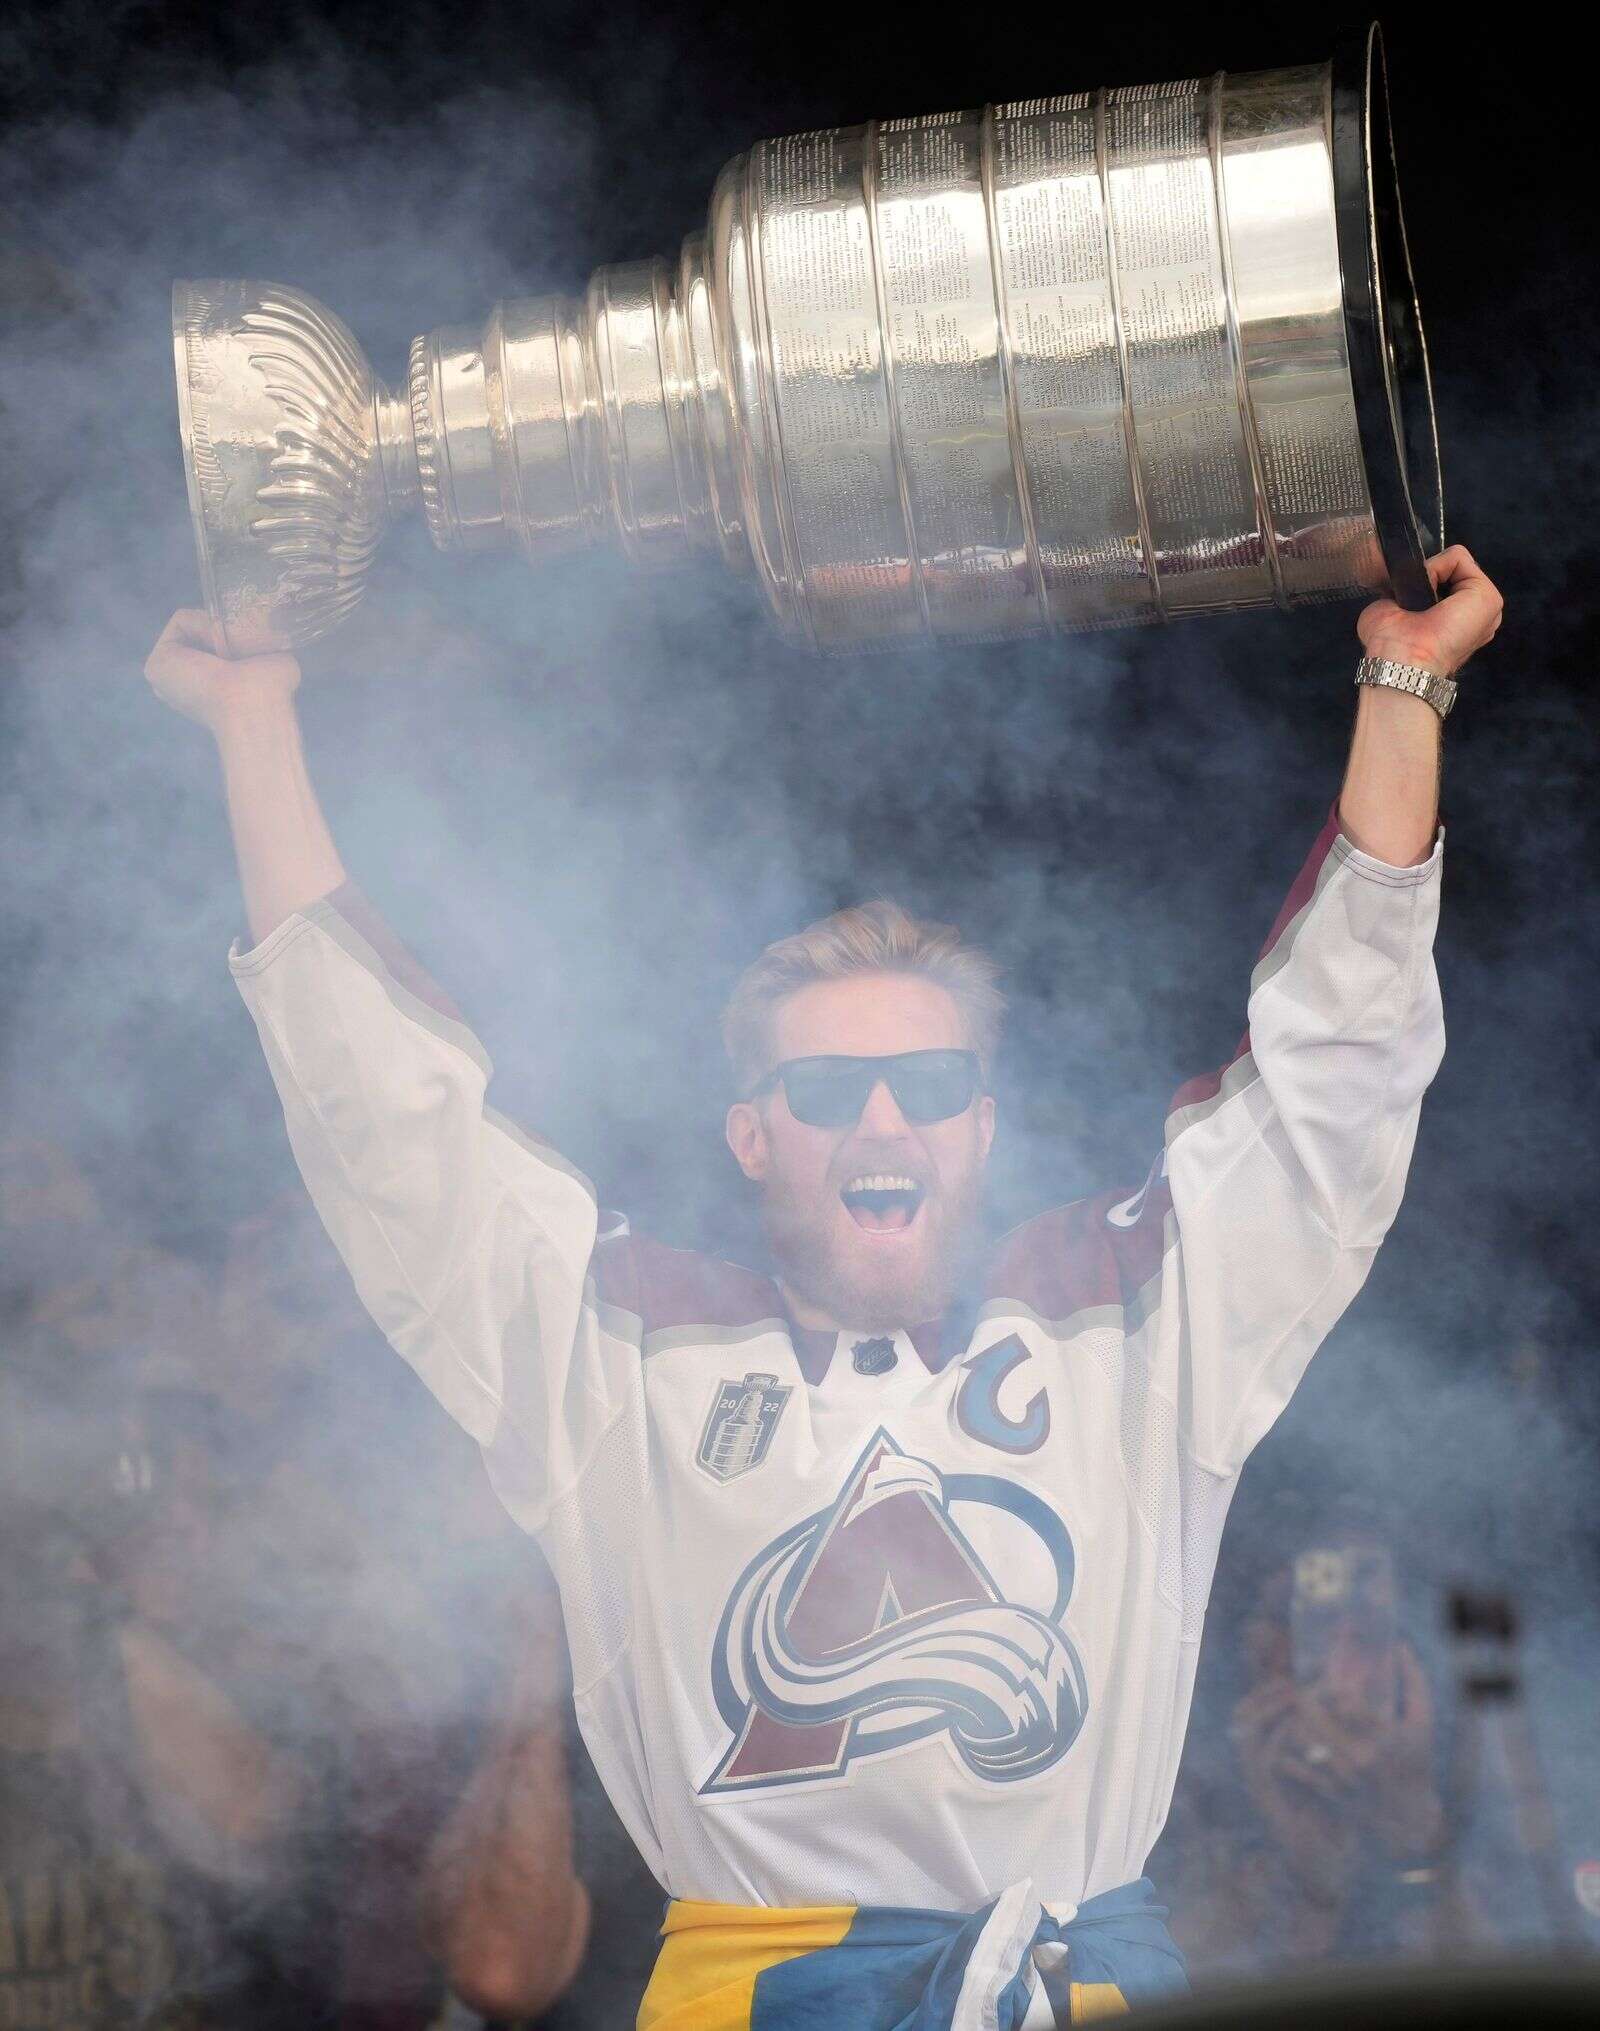 Parade of champs: Avs live it up as they celebrate Cup title